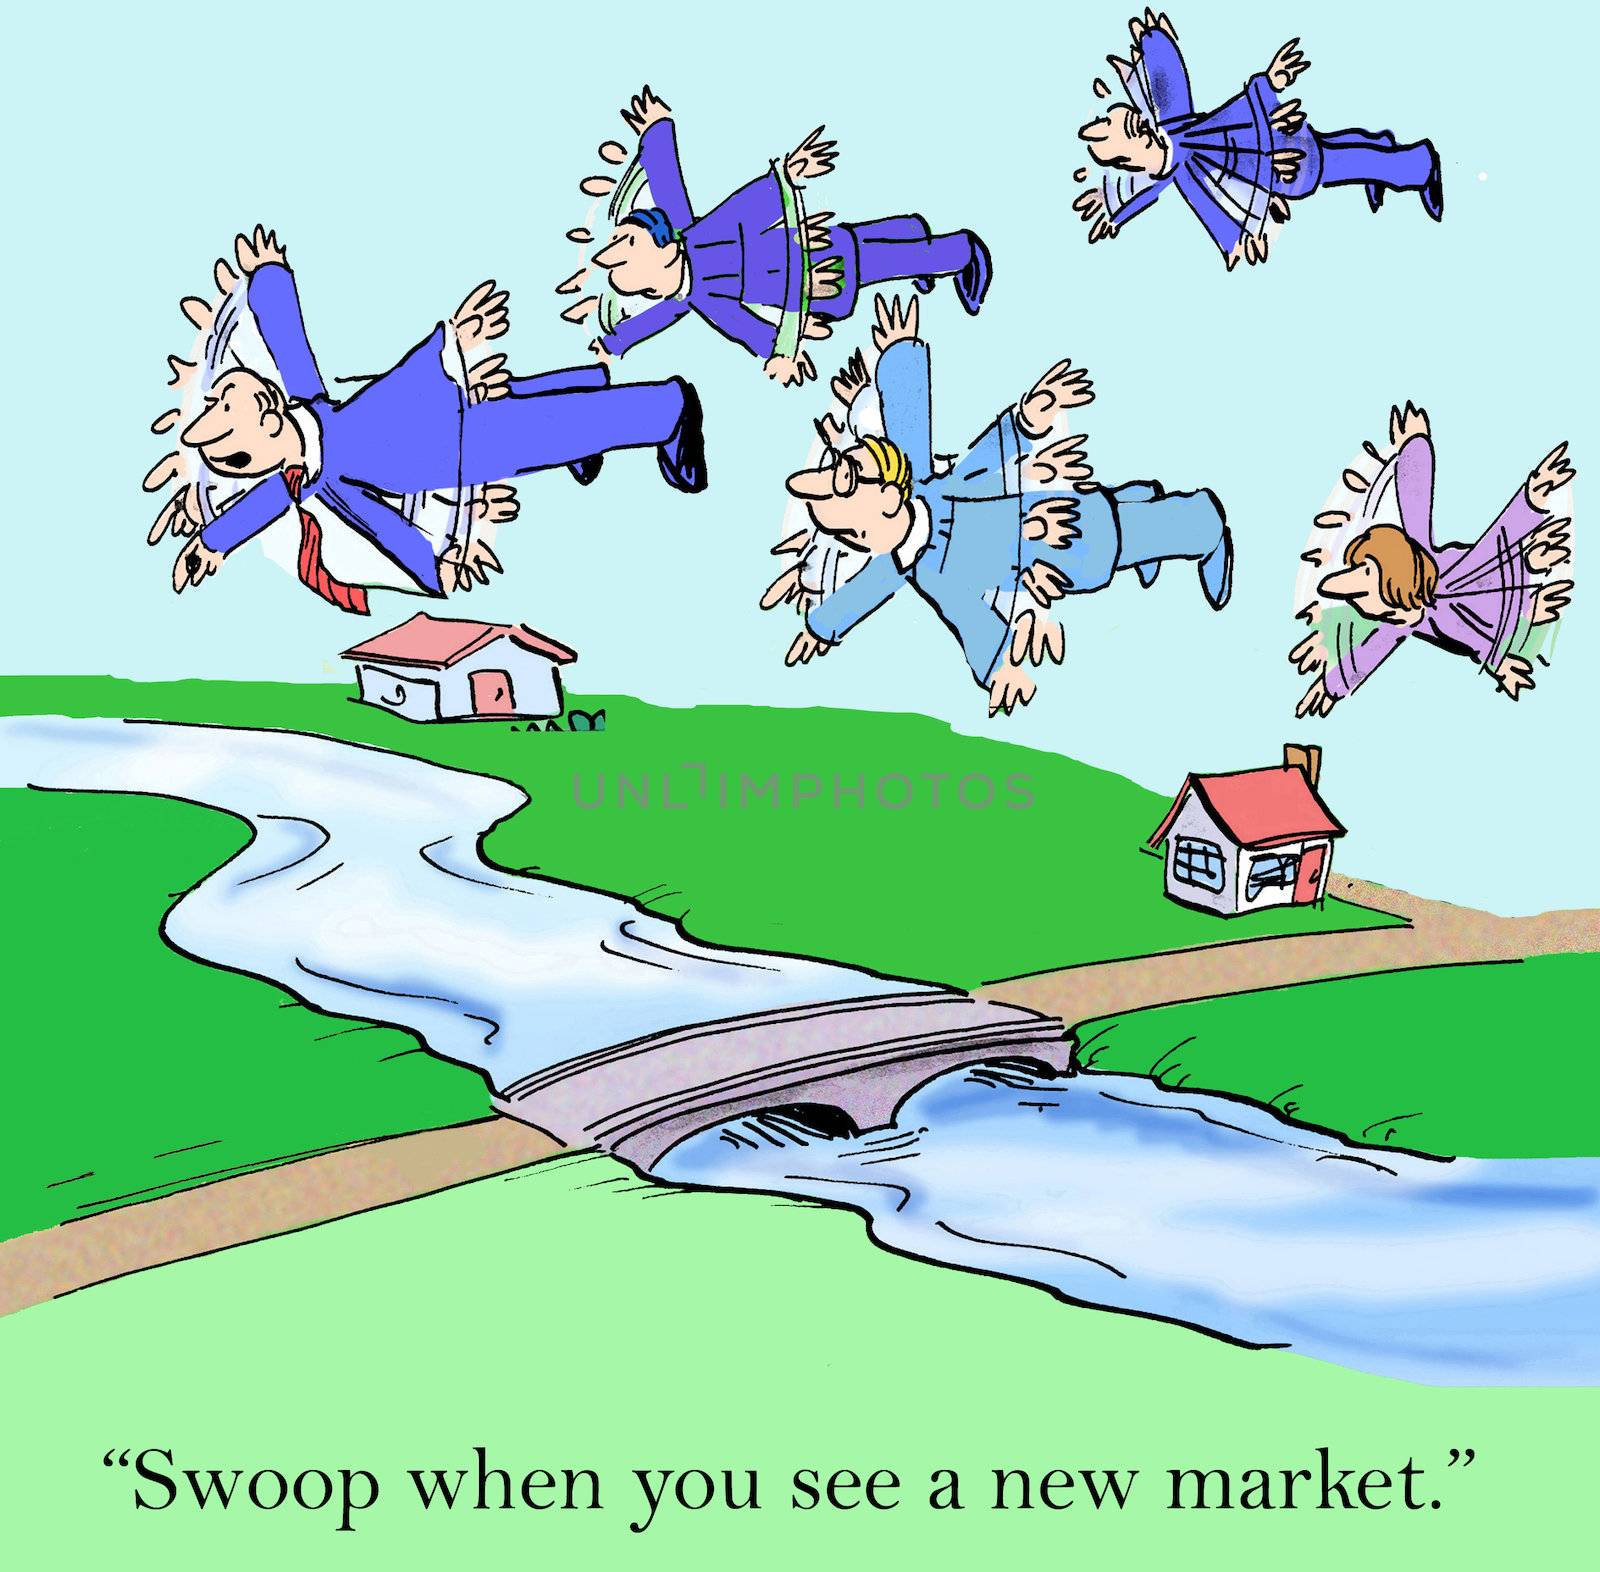 "Swoop when you see a new market."